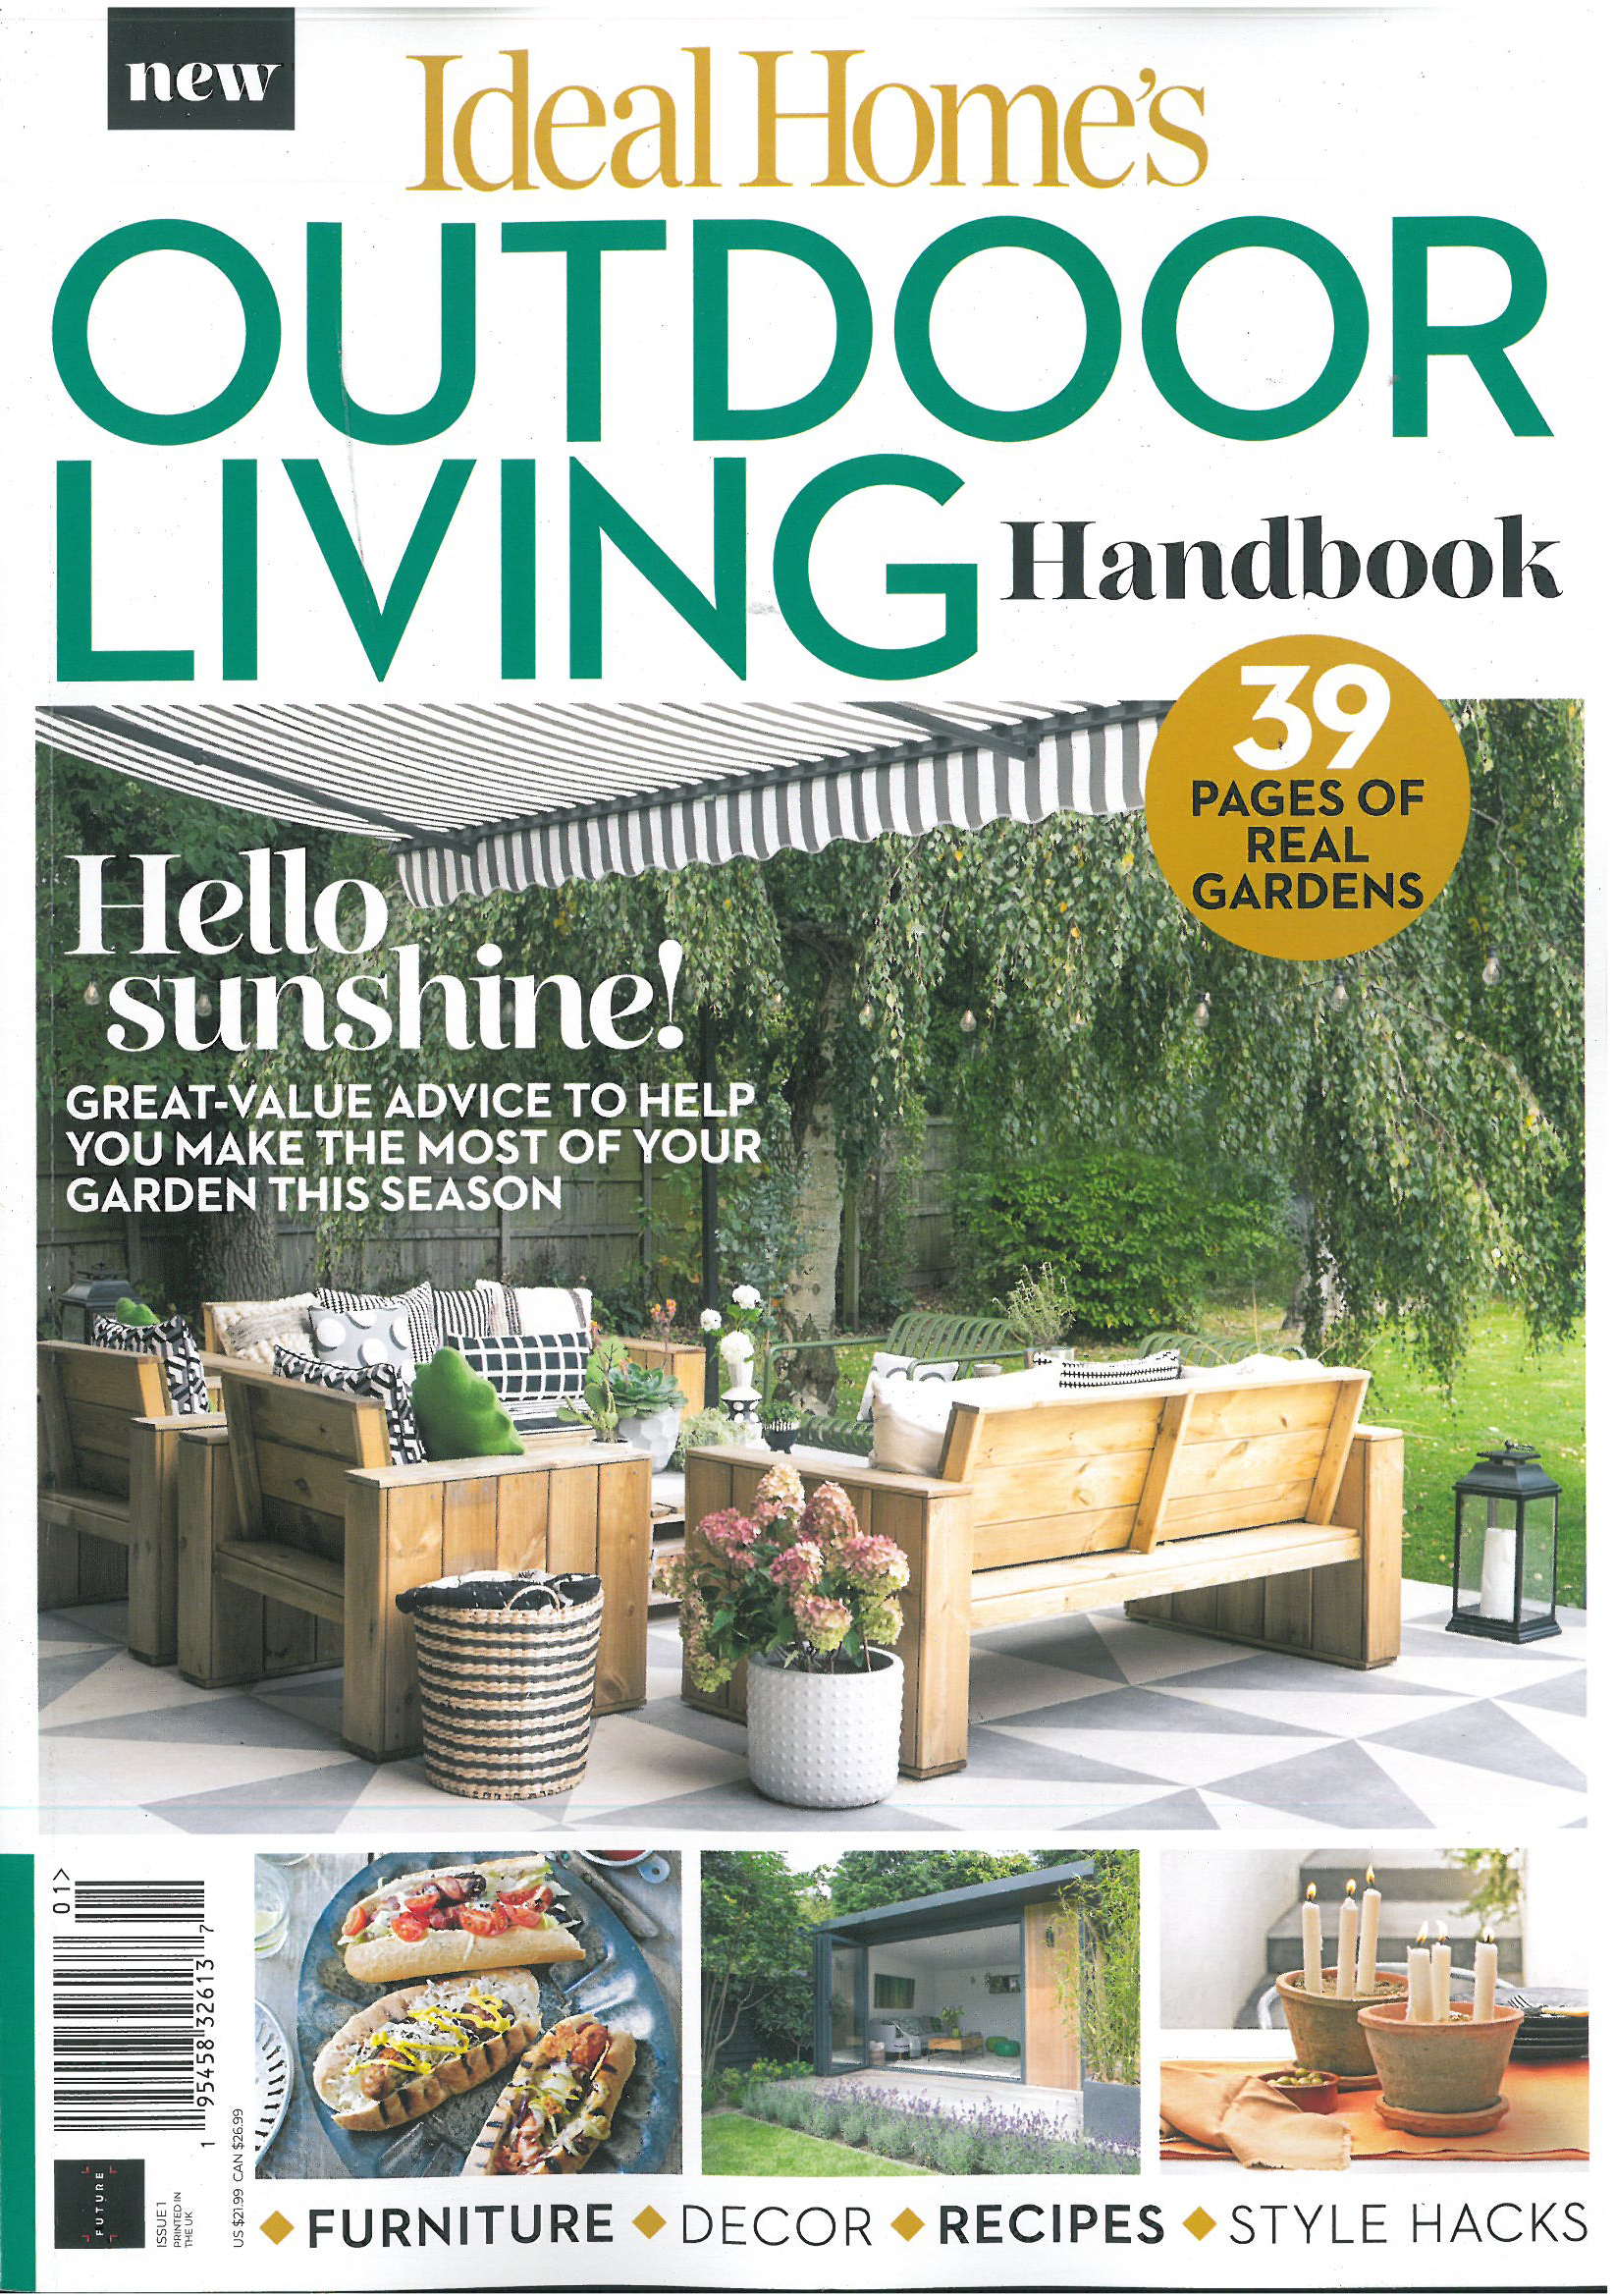 COMPLETE GUIDE TO OUTDOOR LIVING